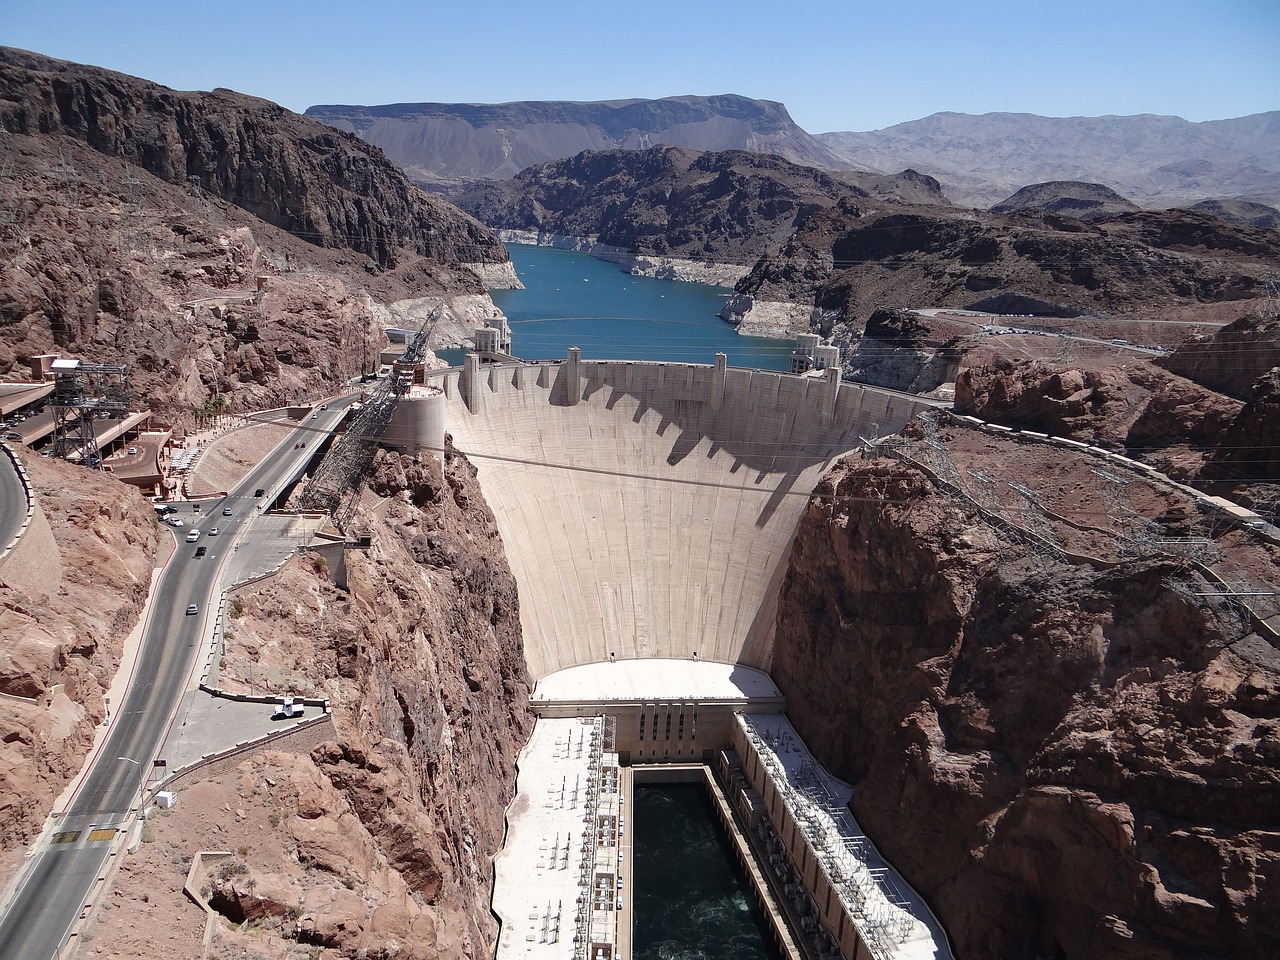 Amazing structures – the Hoover Dam